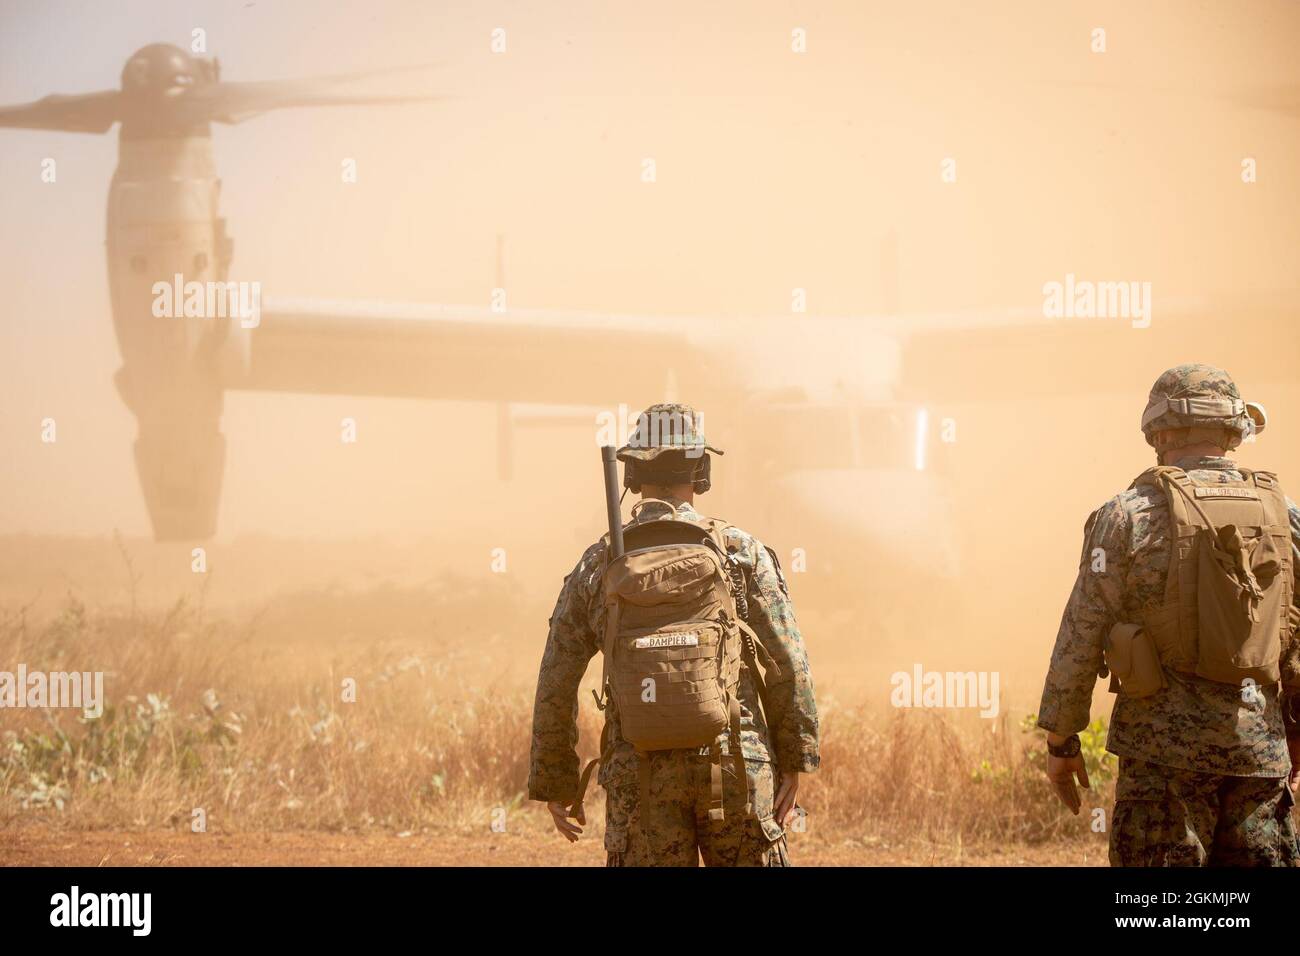 U.S. Marine Corps Staff Sgt. Benjamin Dampier, left, an air traffic controller, and Cpl. Ty Cochrane, an air support operations operator, both with Marine Medium Tiltrotor Squadron 363 (Reinforced), Marine Rotational Force – Darwin, watch an MV-22B Osprey land at Point Fawcett, NT, Australia during exercise Crocodile Response, May 27, 2021. Exercise Crocodile Response tested the ability of MRF-D and the Australian Defence Force to provide disaster relief in the Indo-Pacific region. The rotational deployment of U.S. Marines affords a combined training opportunity with Australia and improves coo Stock Photo